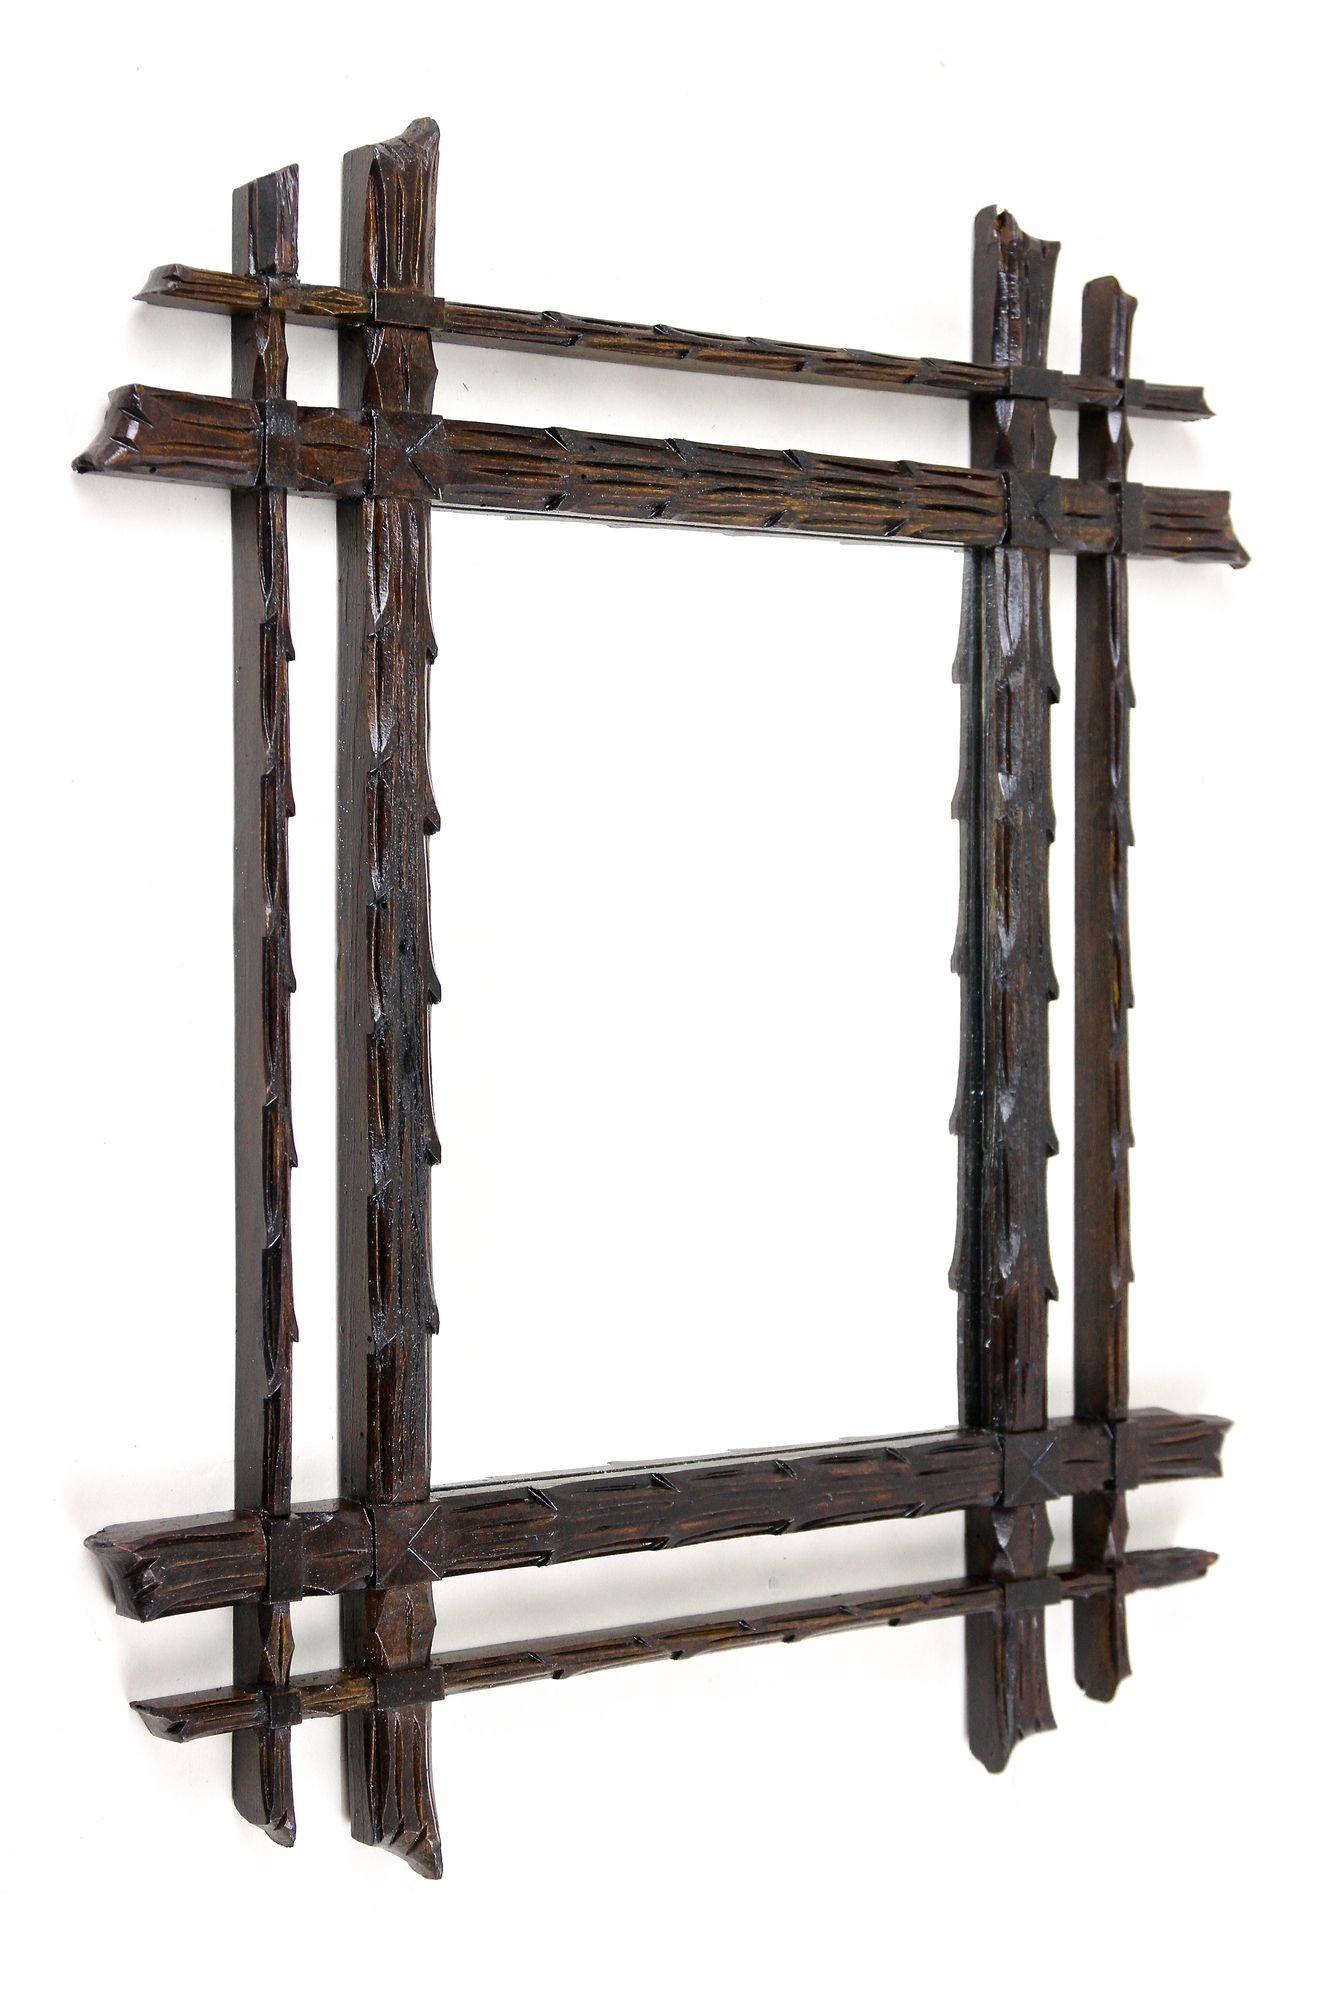 Extraordinary rustic wall mirror from the 19th century around 1870 in Austria. An unusual piece of a Black Forest mirror that has been elaborately handcarved out of basswood in an exceptional style. The main frame has been creafted in a very